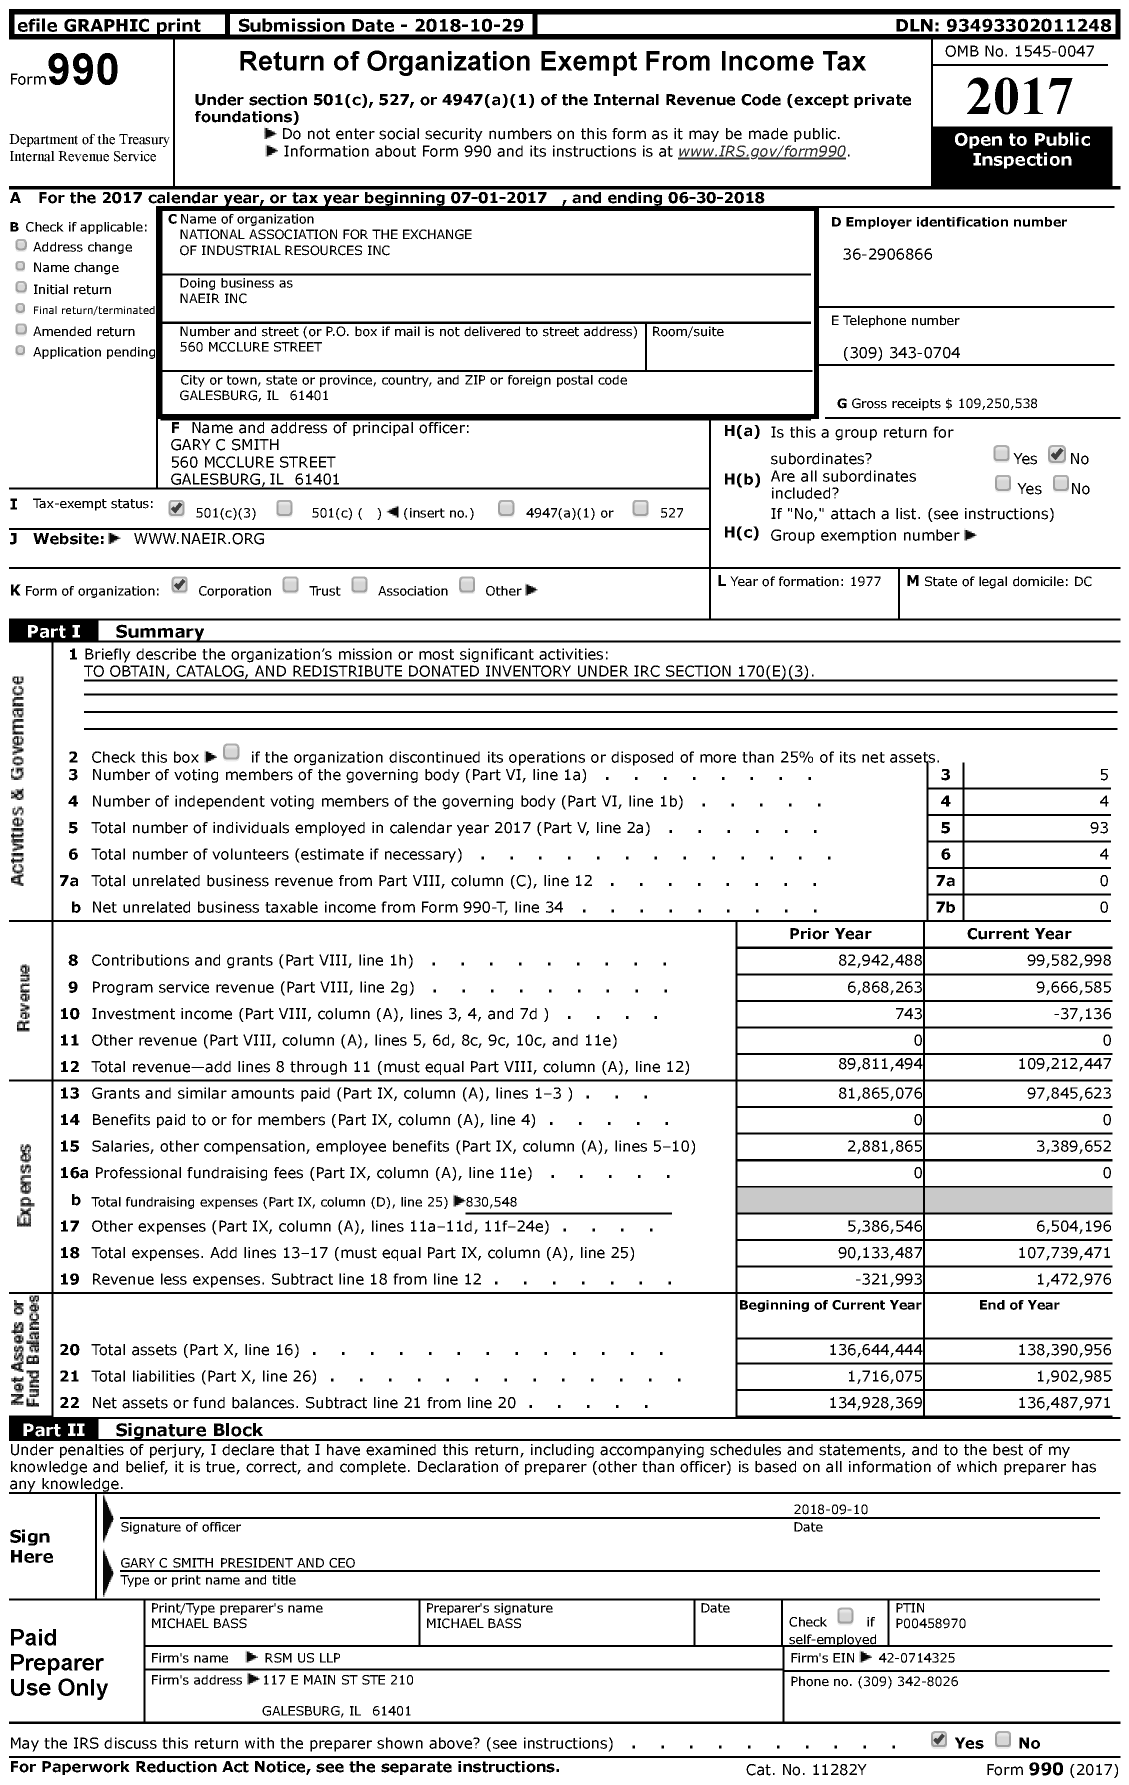 Image of first page of 2017 Form 990 for National Association for the Exchange of Industrial Resources (NAEIR)